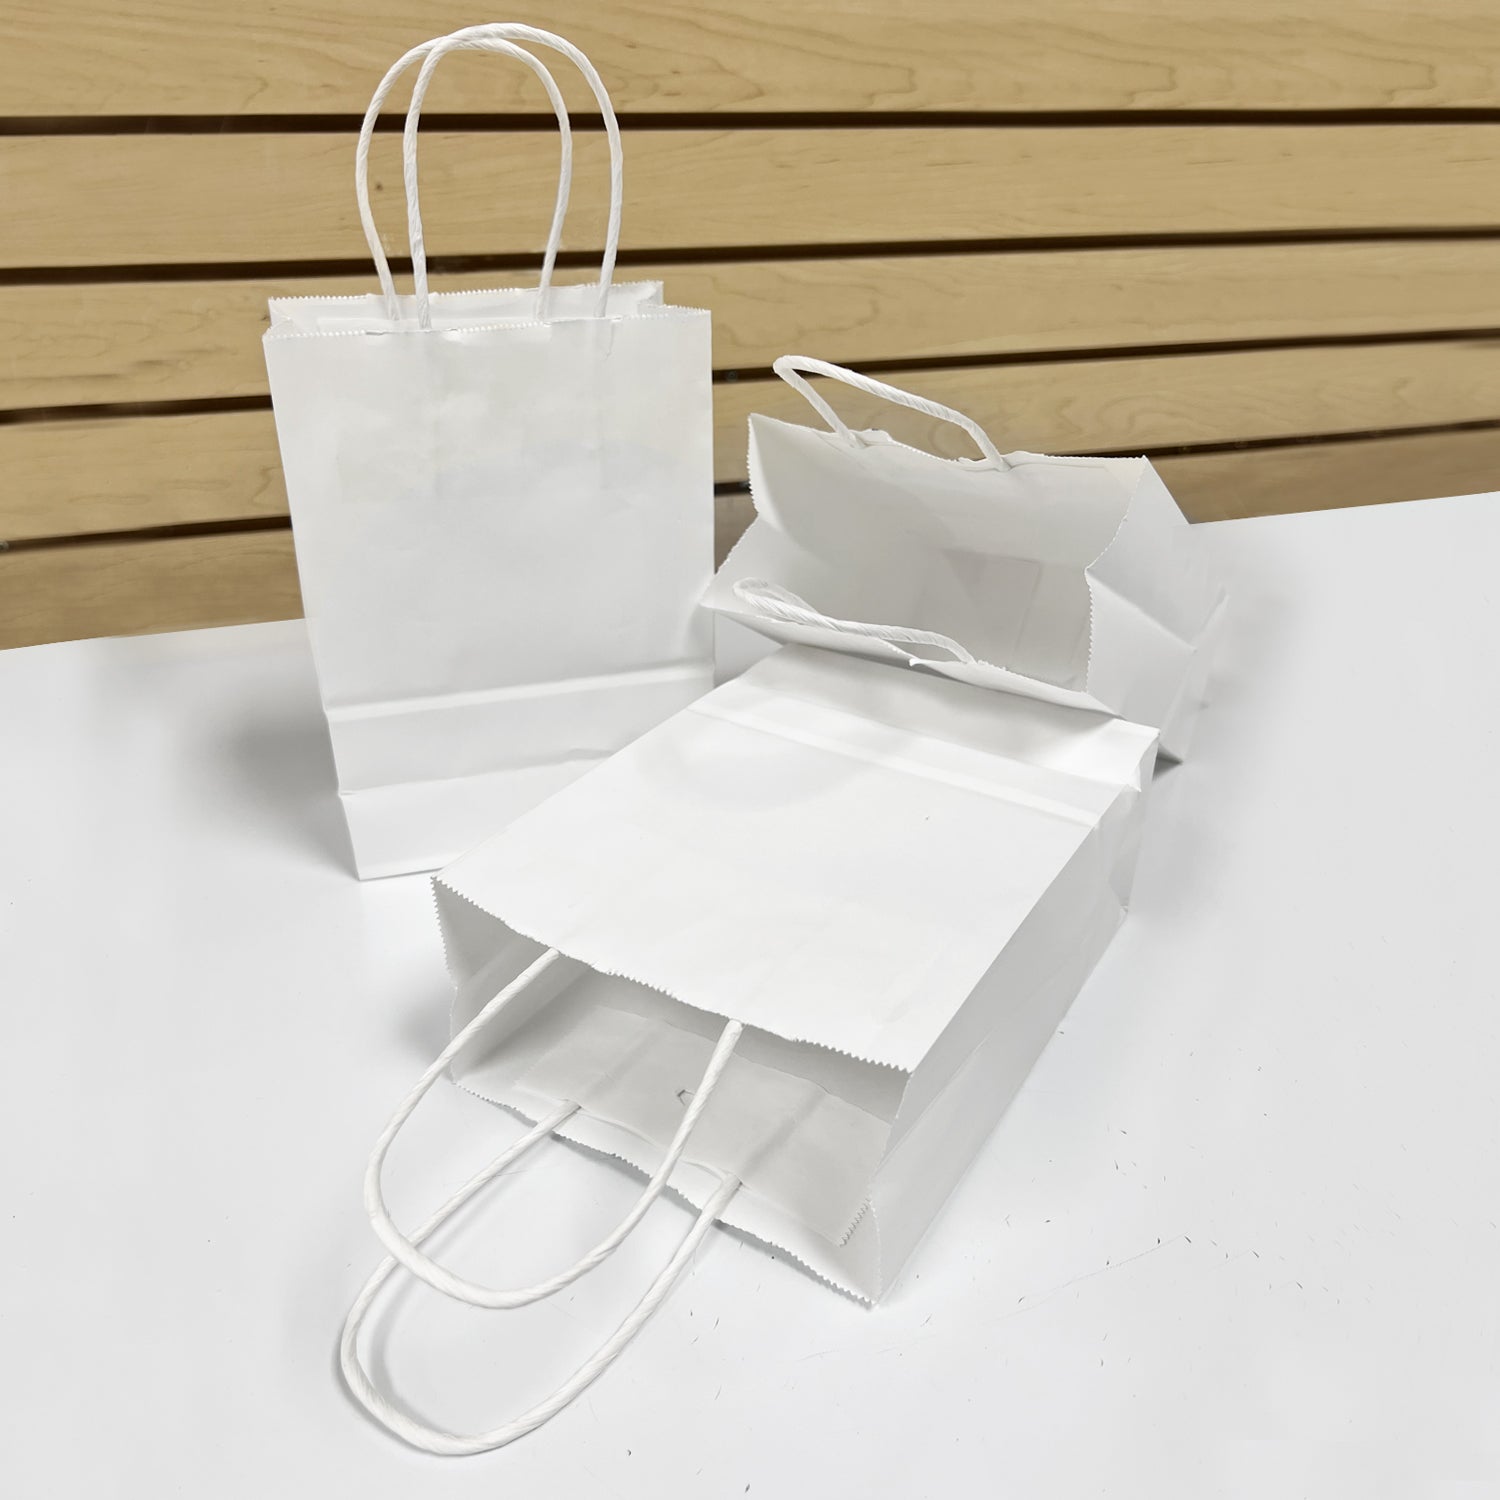 250 Pcs, Gem, 5.3x3.5x8.5 inches, White Kraft Paper Bags, with Twisted Handle